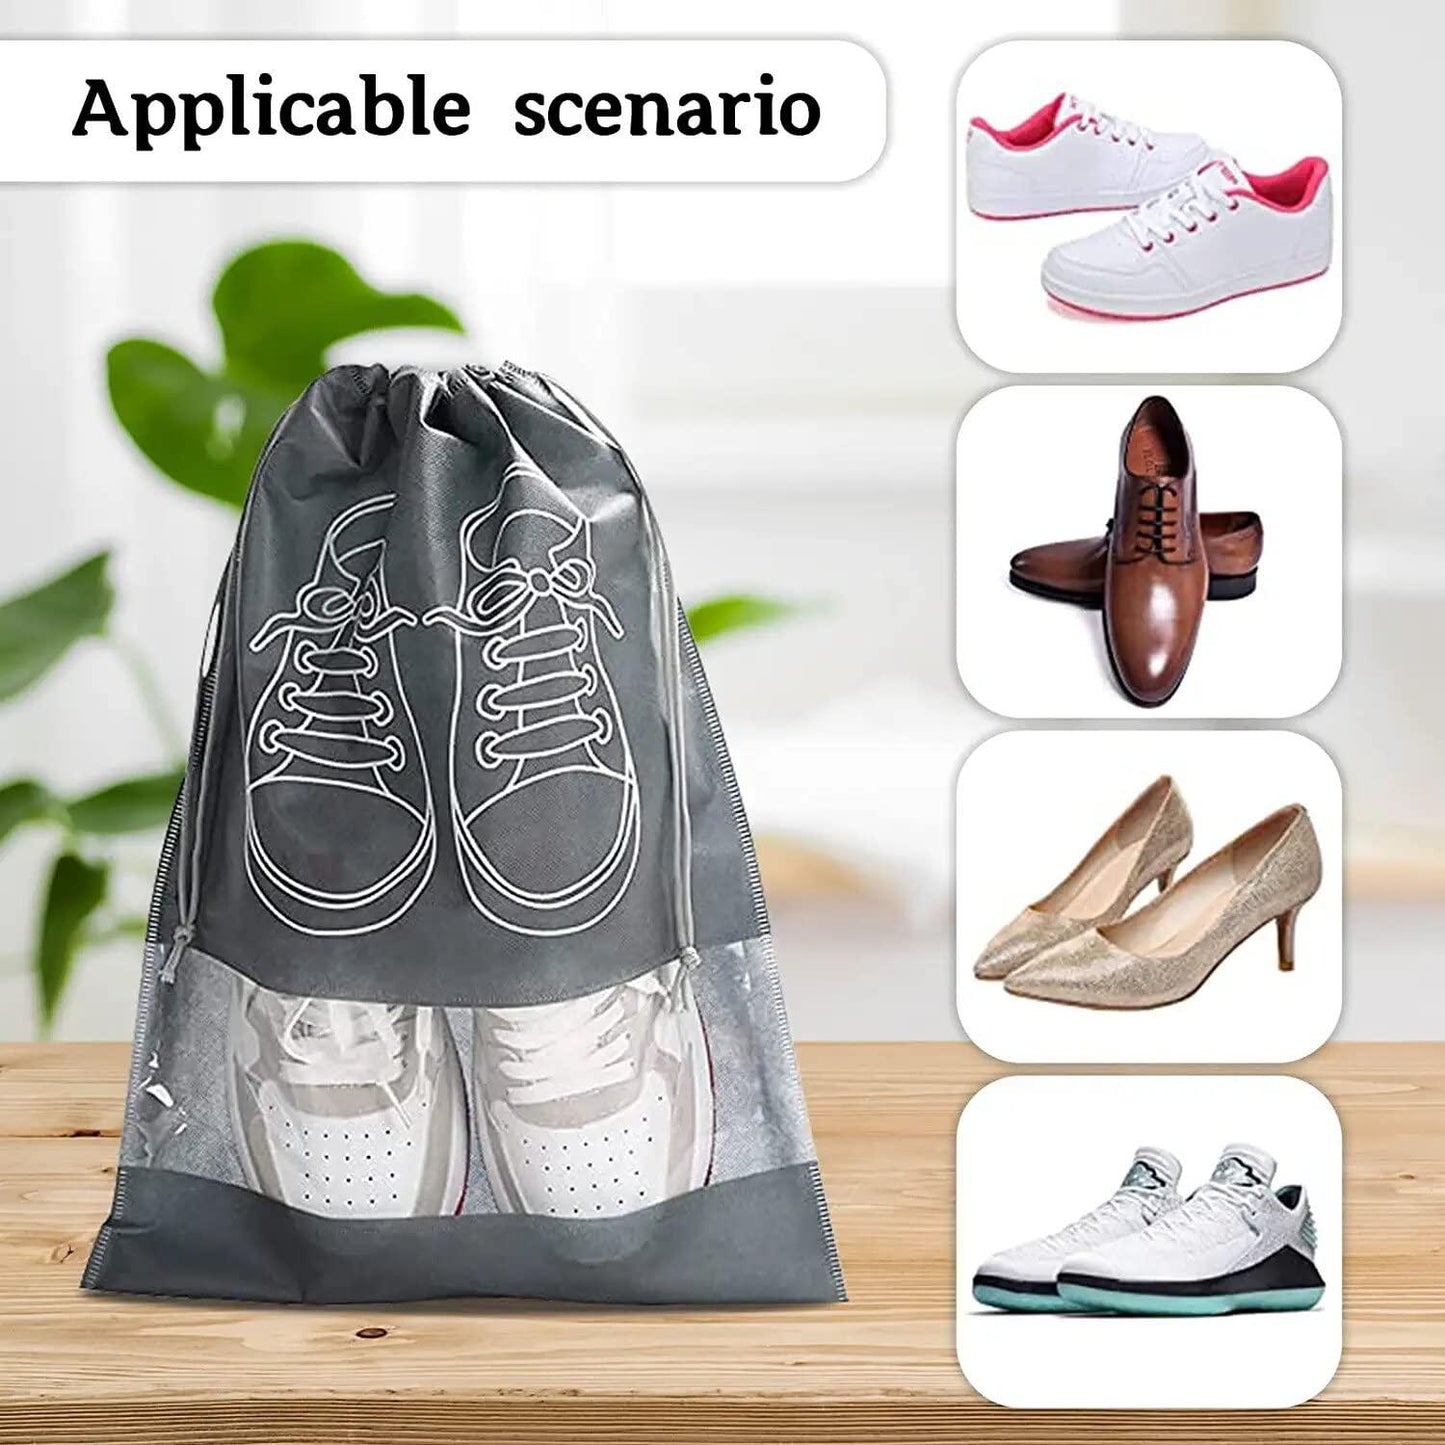 Shoe Bag - Water and Dust-Proof